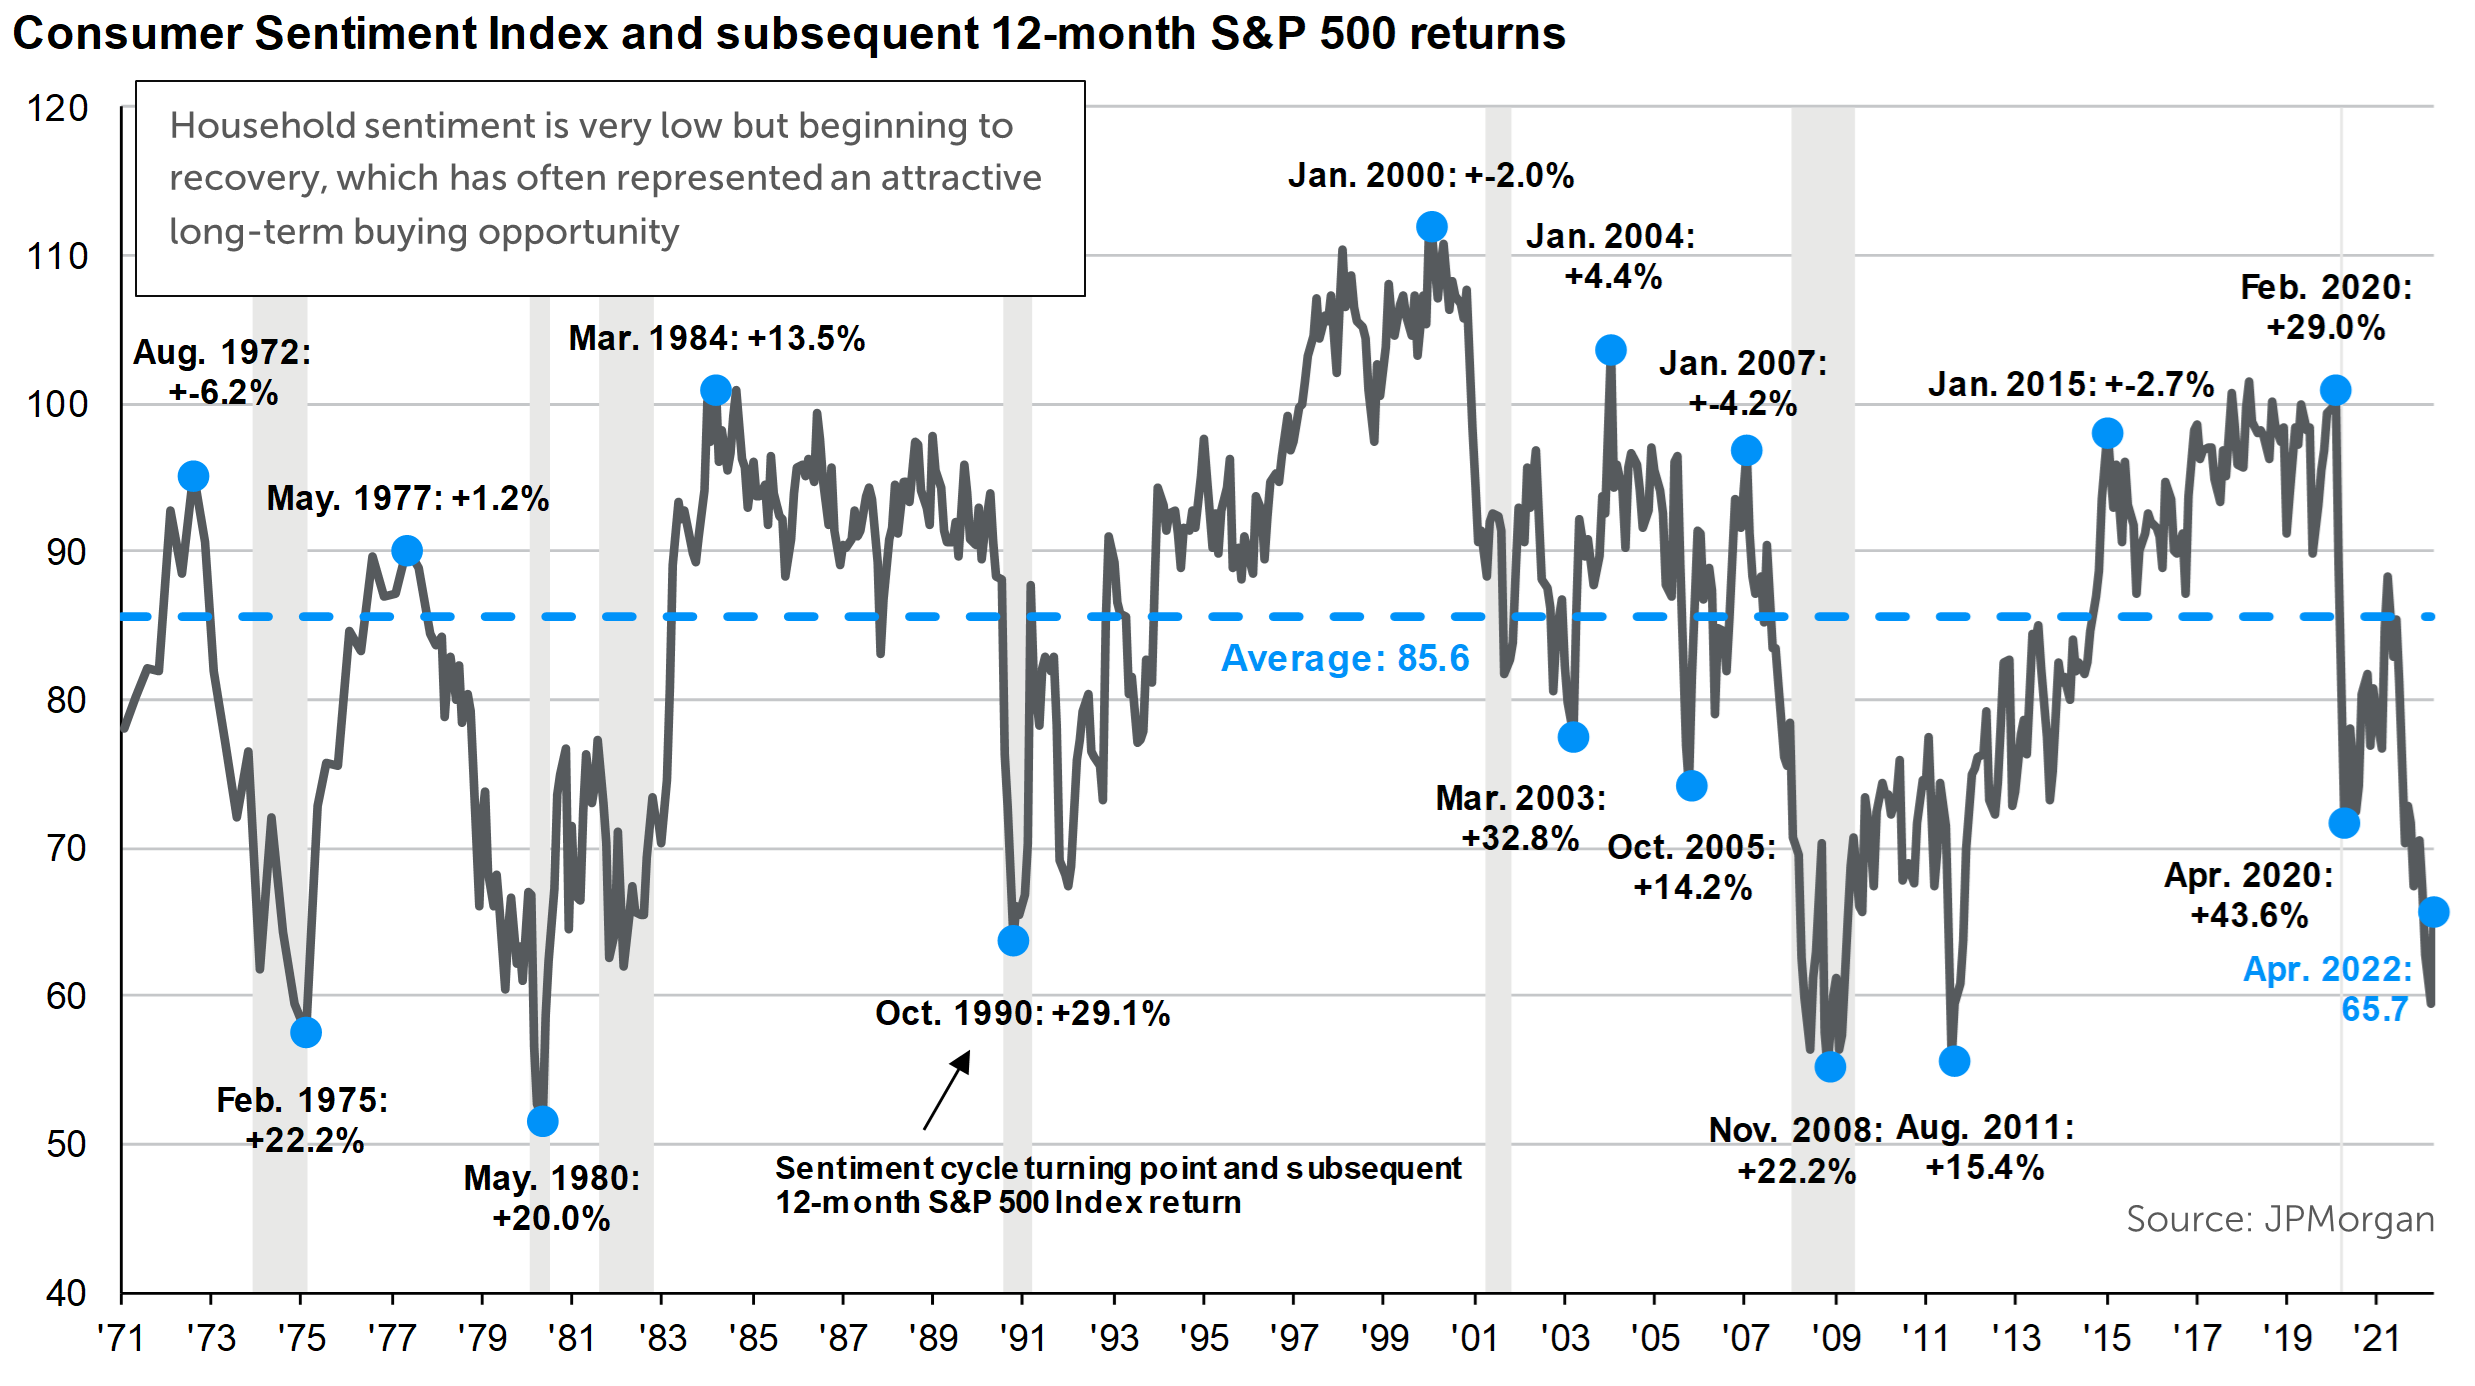 Line graph depicting Consumer Sentiment Index and subsequent 12-month S&P 500 returns